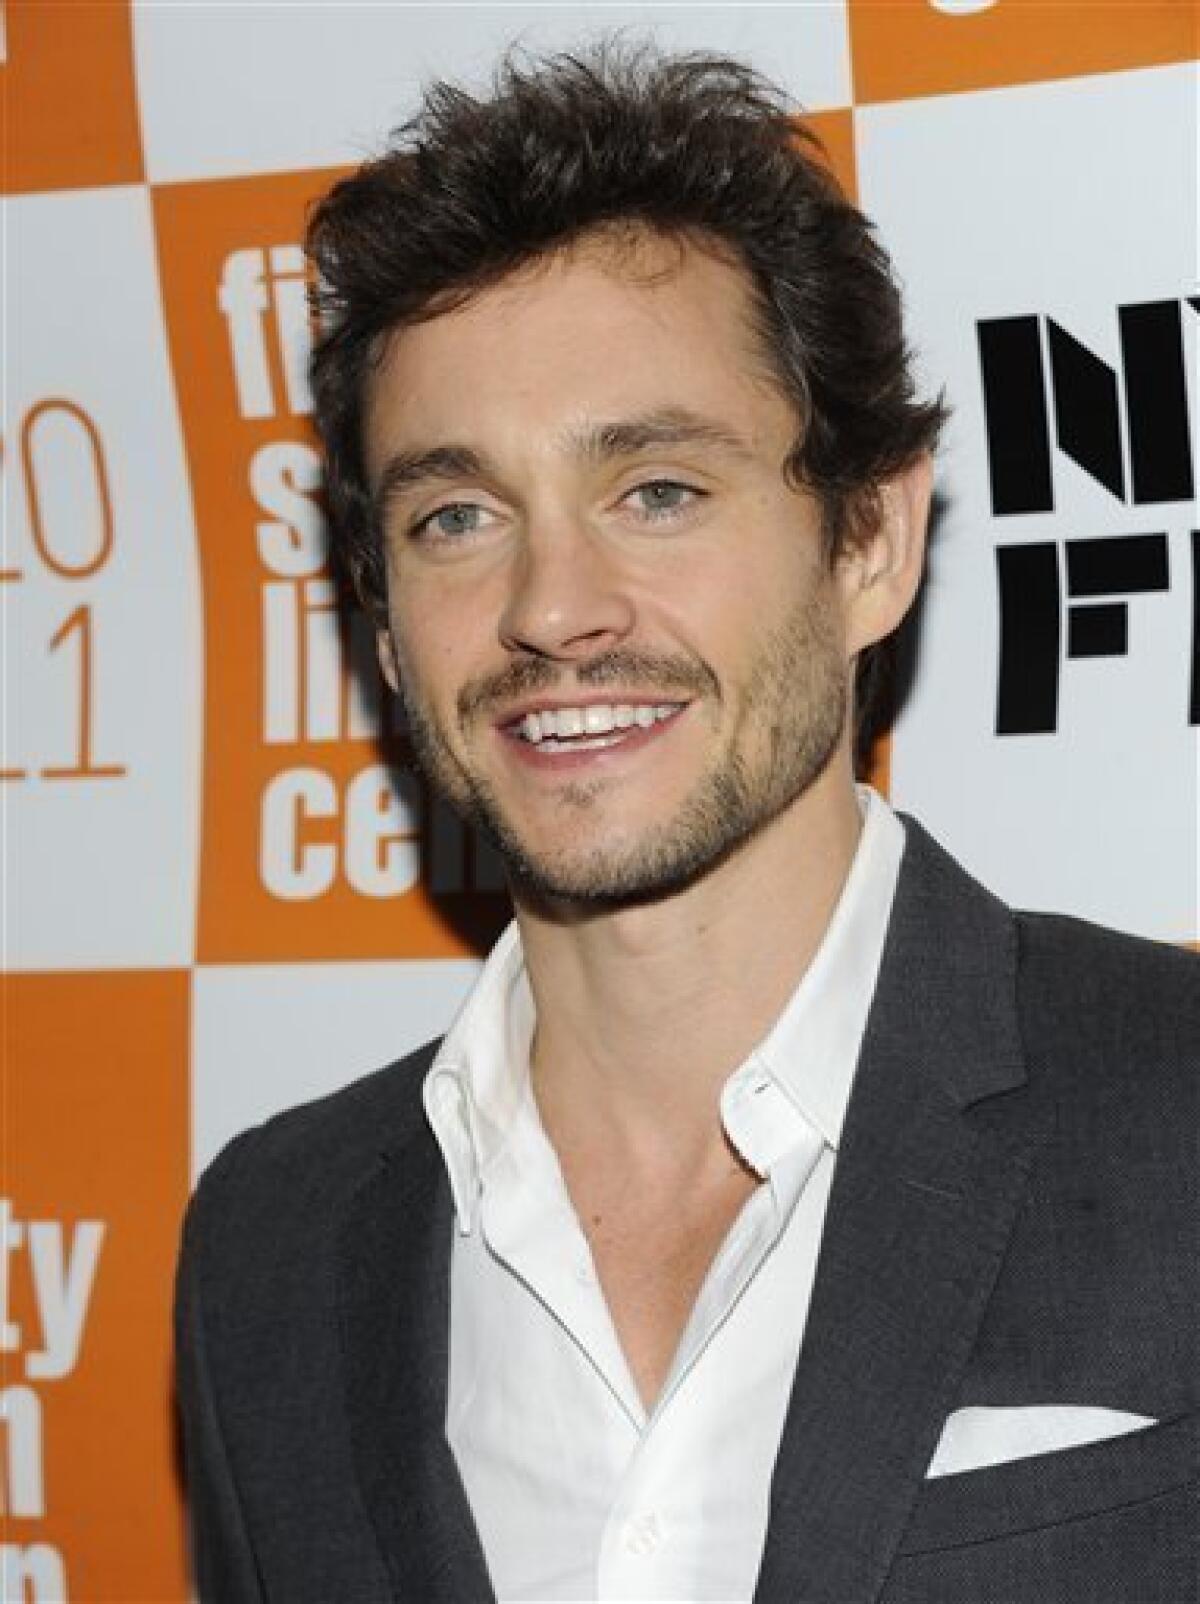 FILE - In this Oct. 11, 2011 file photo, actor Hugh Dancy attends a screening of "Martha Marcy May Marlene" during the 49th Annual New York Film Festival at Alice Tully Hall in New York. Dancy returns to Broadway in the tricky play "Venus in Fur" opening Nov. 8. (AP Photo/Evan Agostini, file)